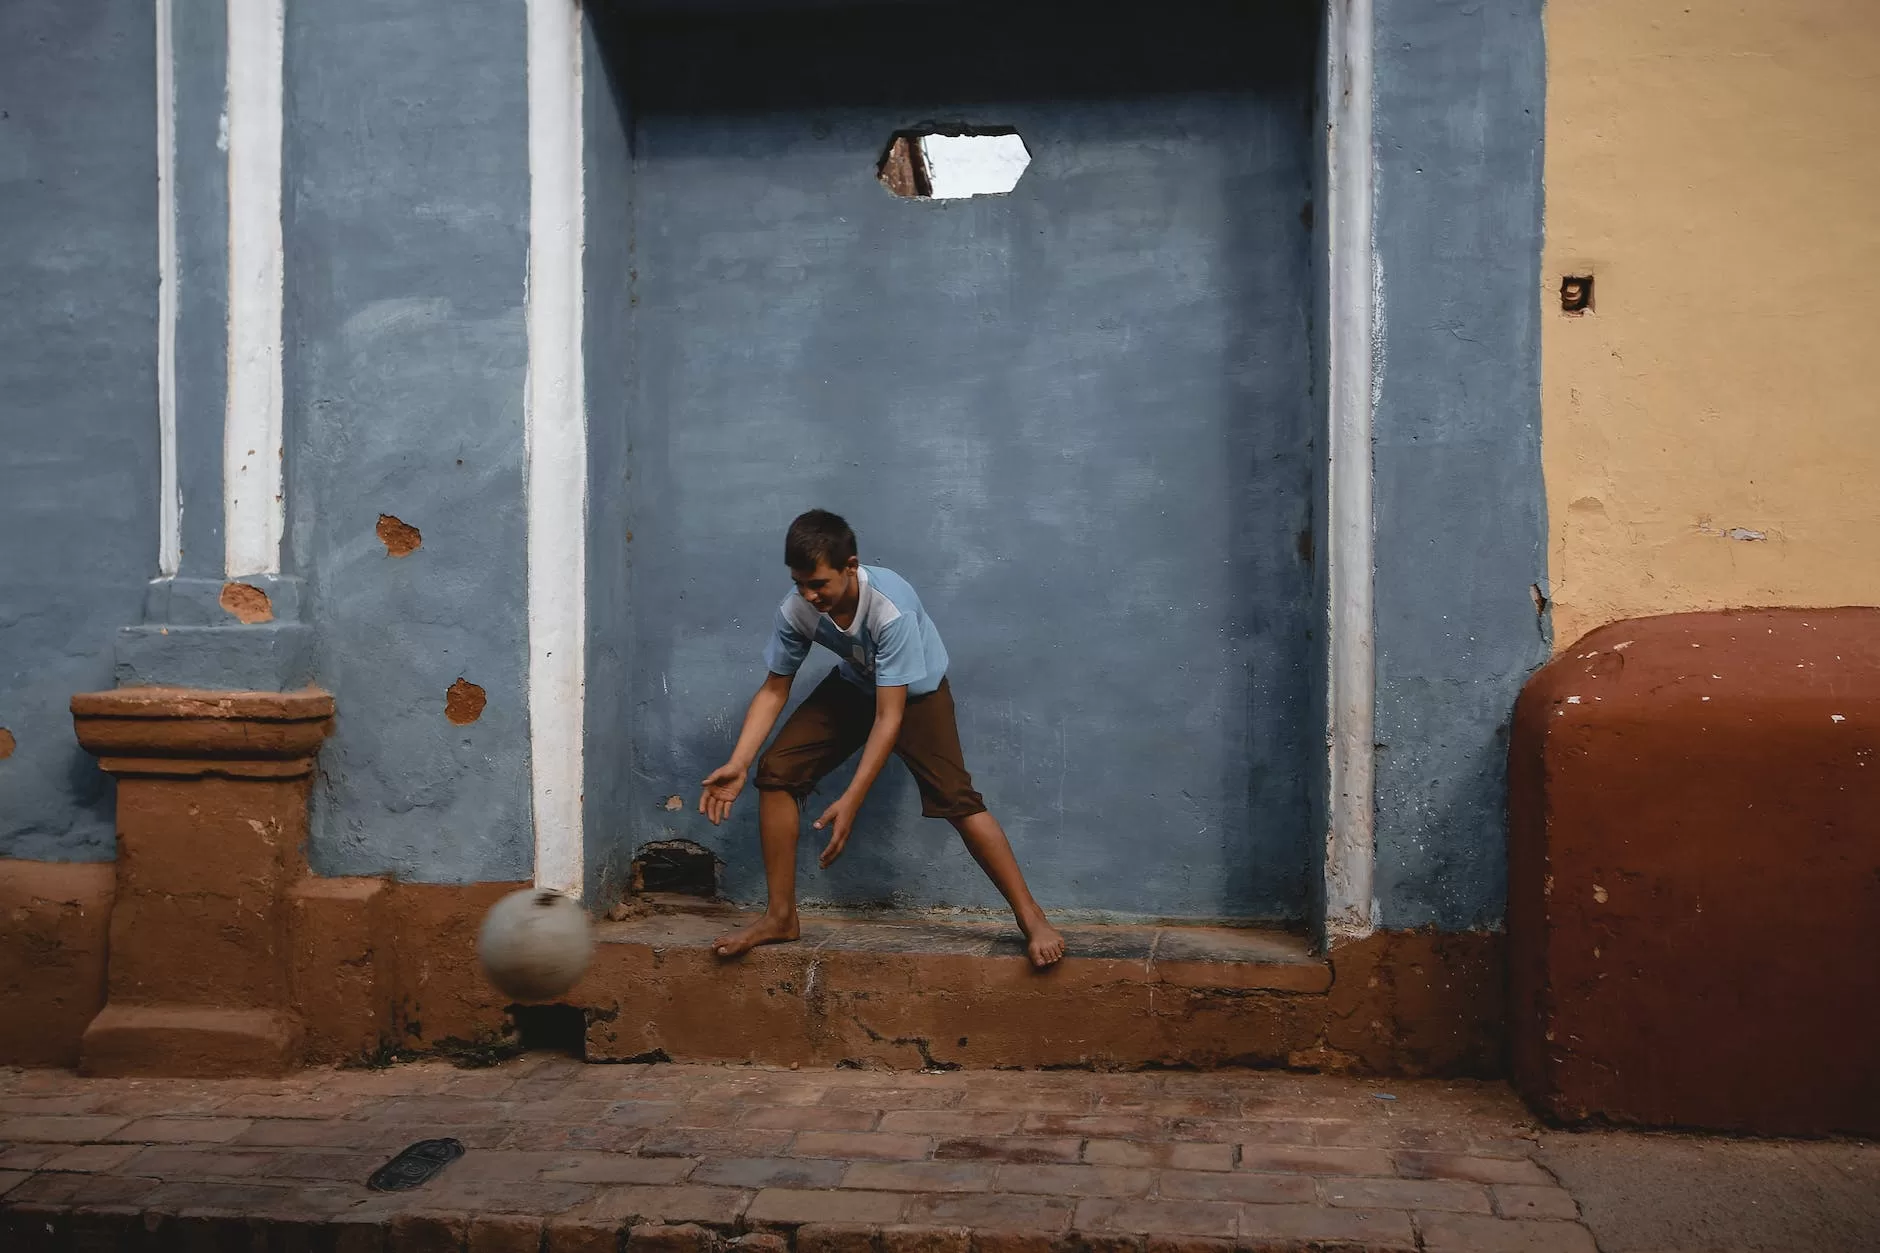 a boy playing a ball in a building niche